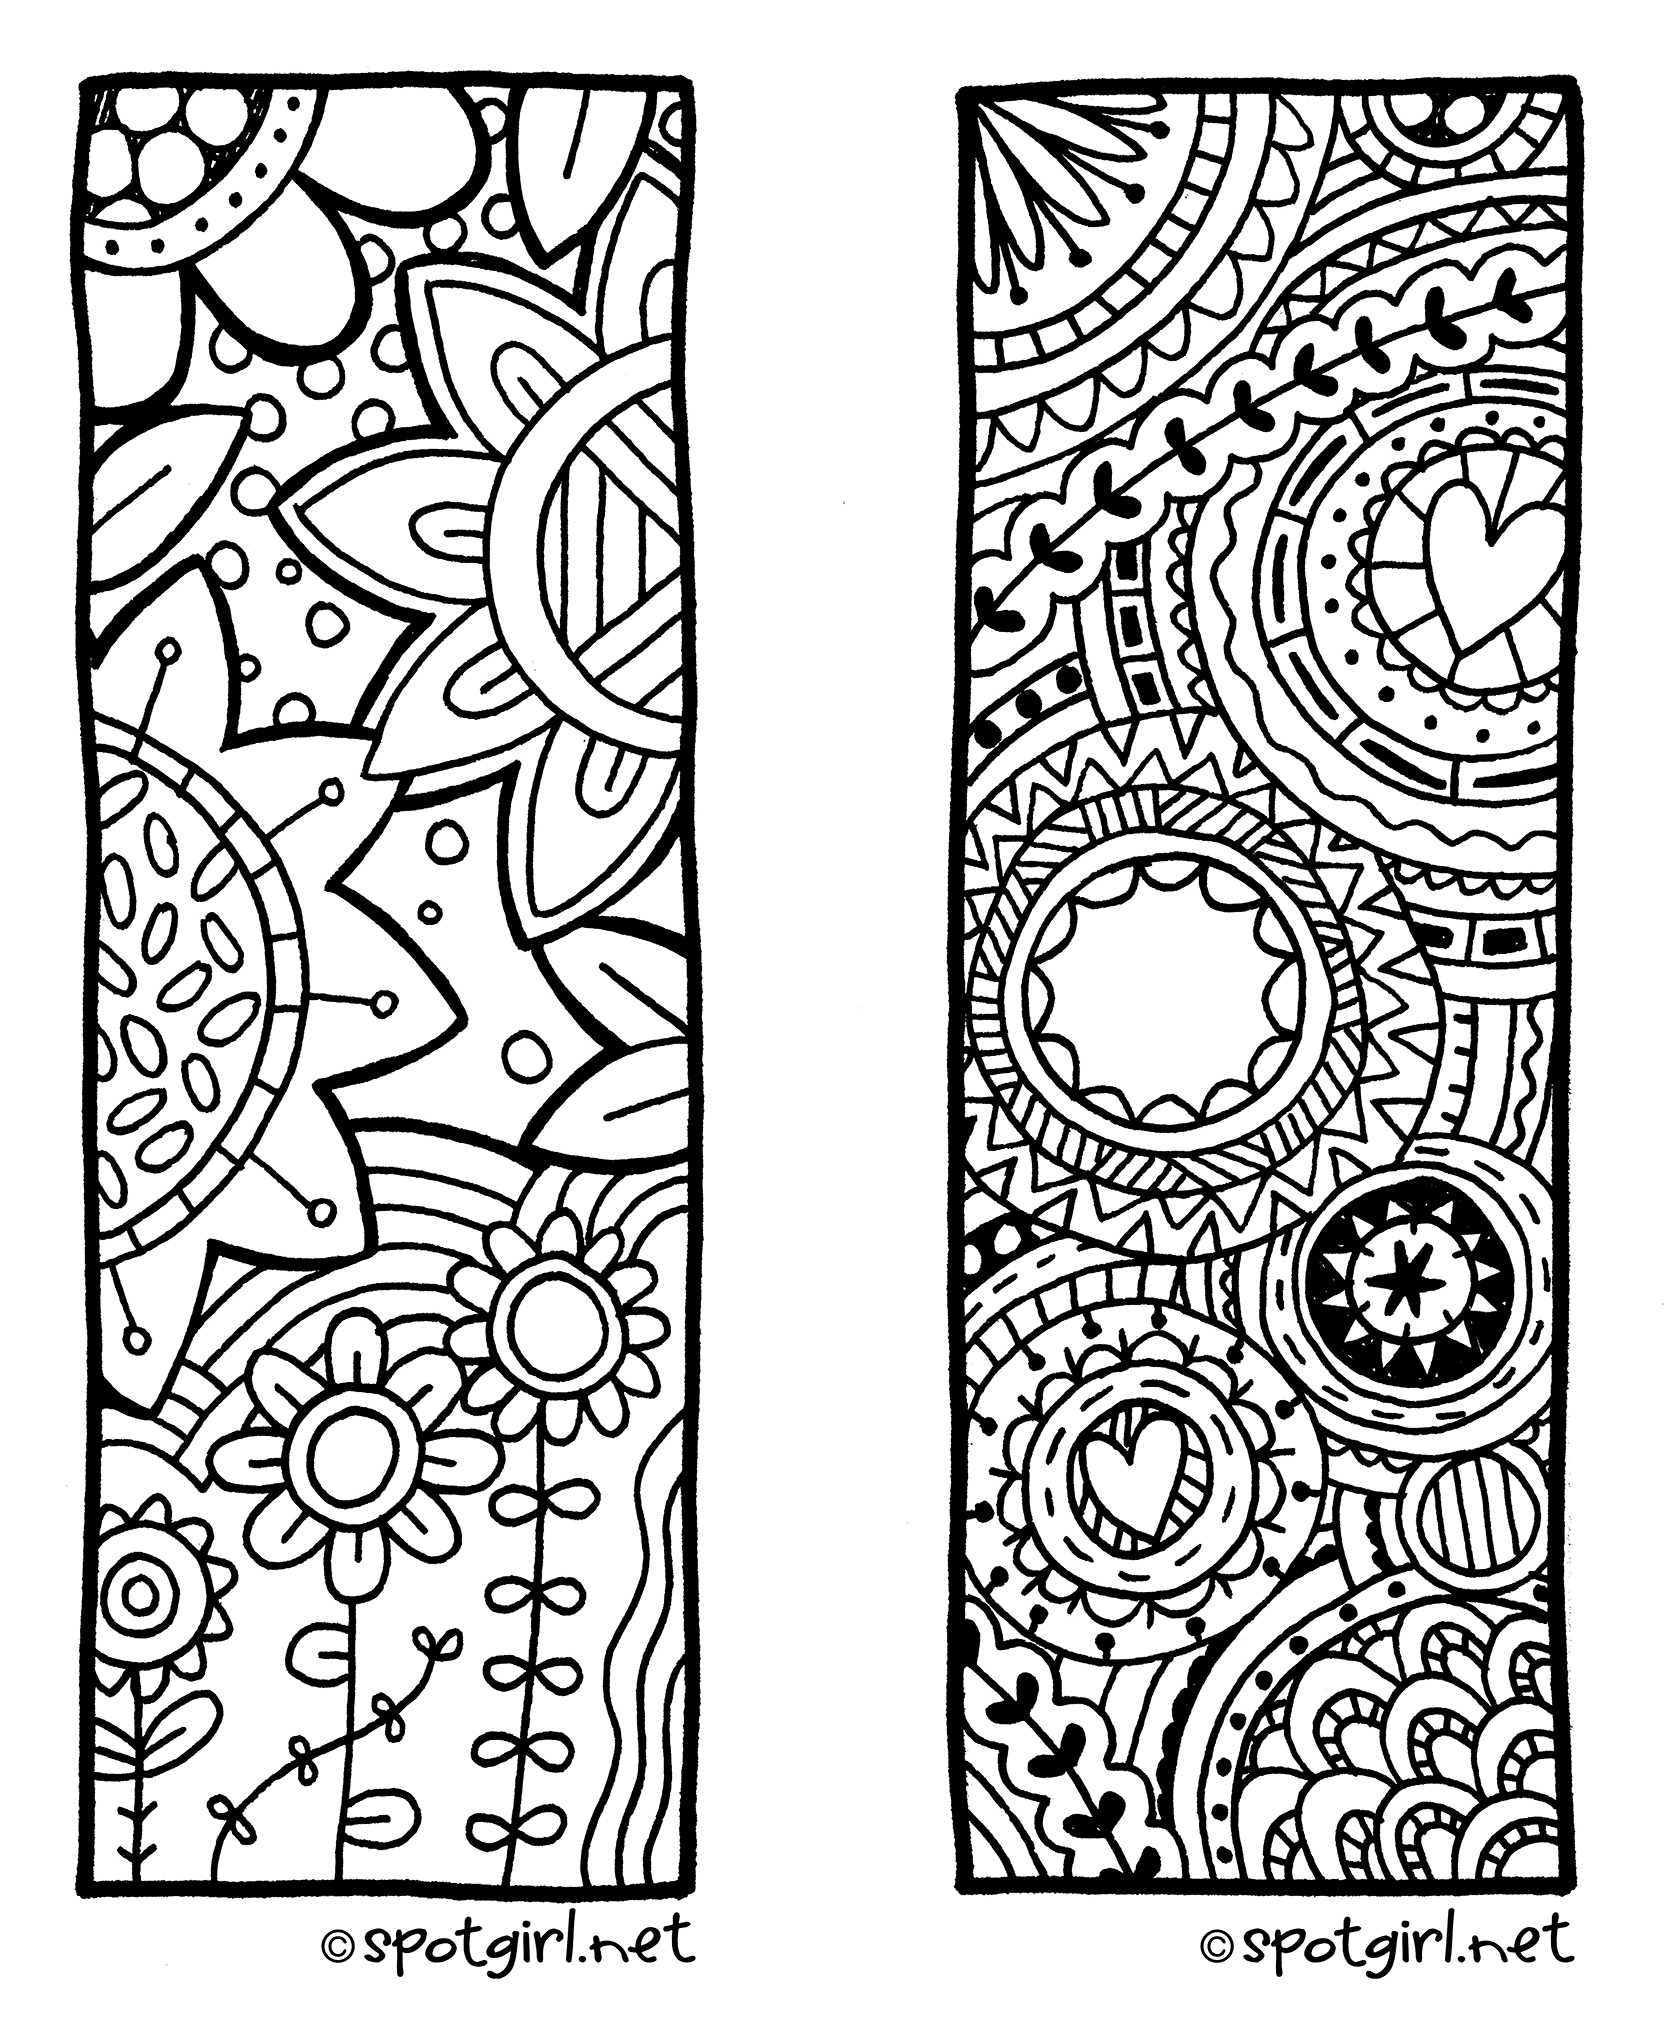 Coloring Pages : 58 Astonishing Free Bookmarks To Color Pertaining To Free Blank Bookmark Templates To Print